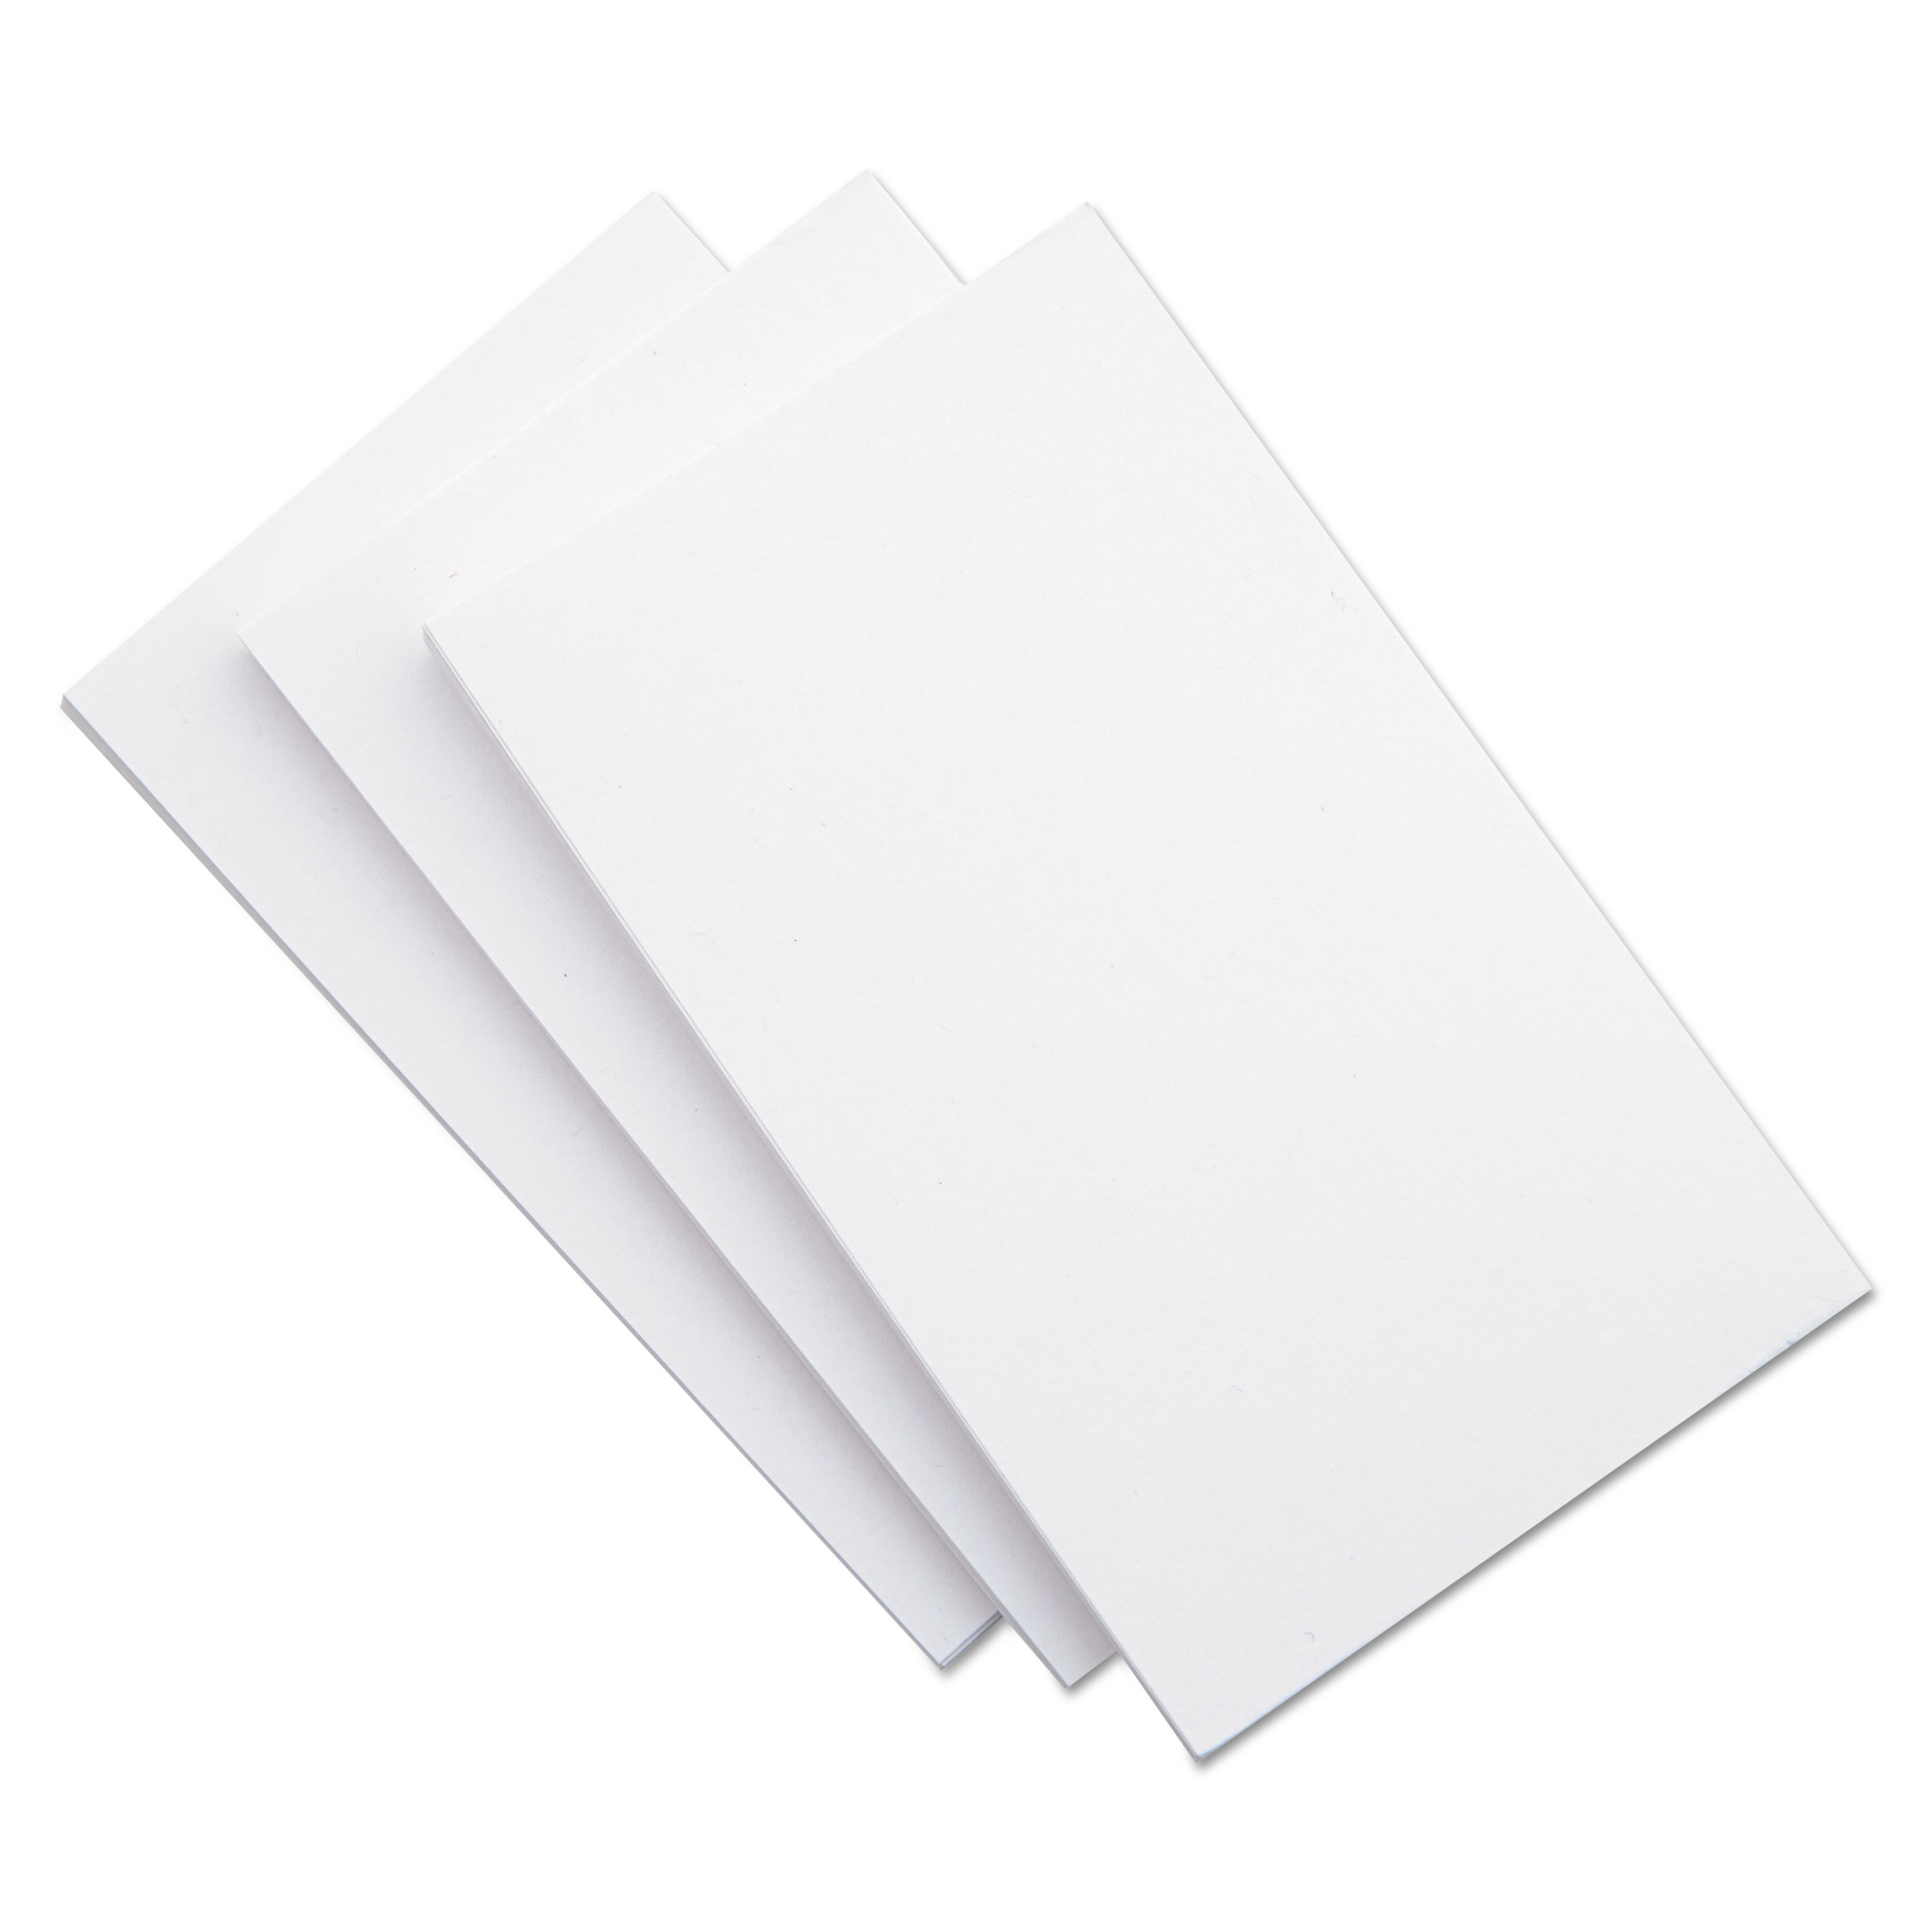  Universal UNV47245 Unruled Index Cards, 5 x 8, White, 500/Pack (UNV47245) 